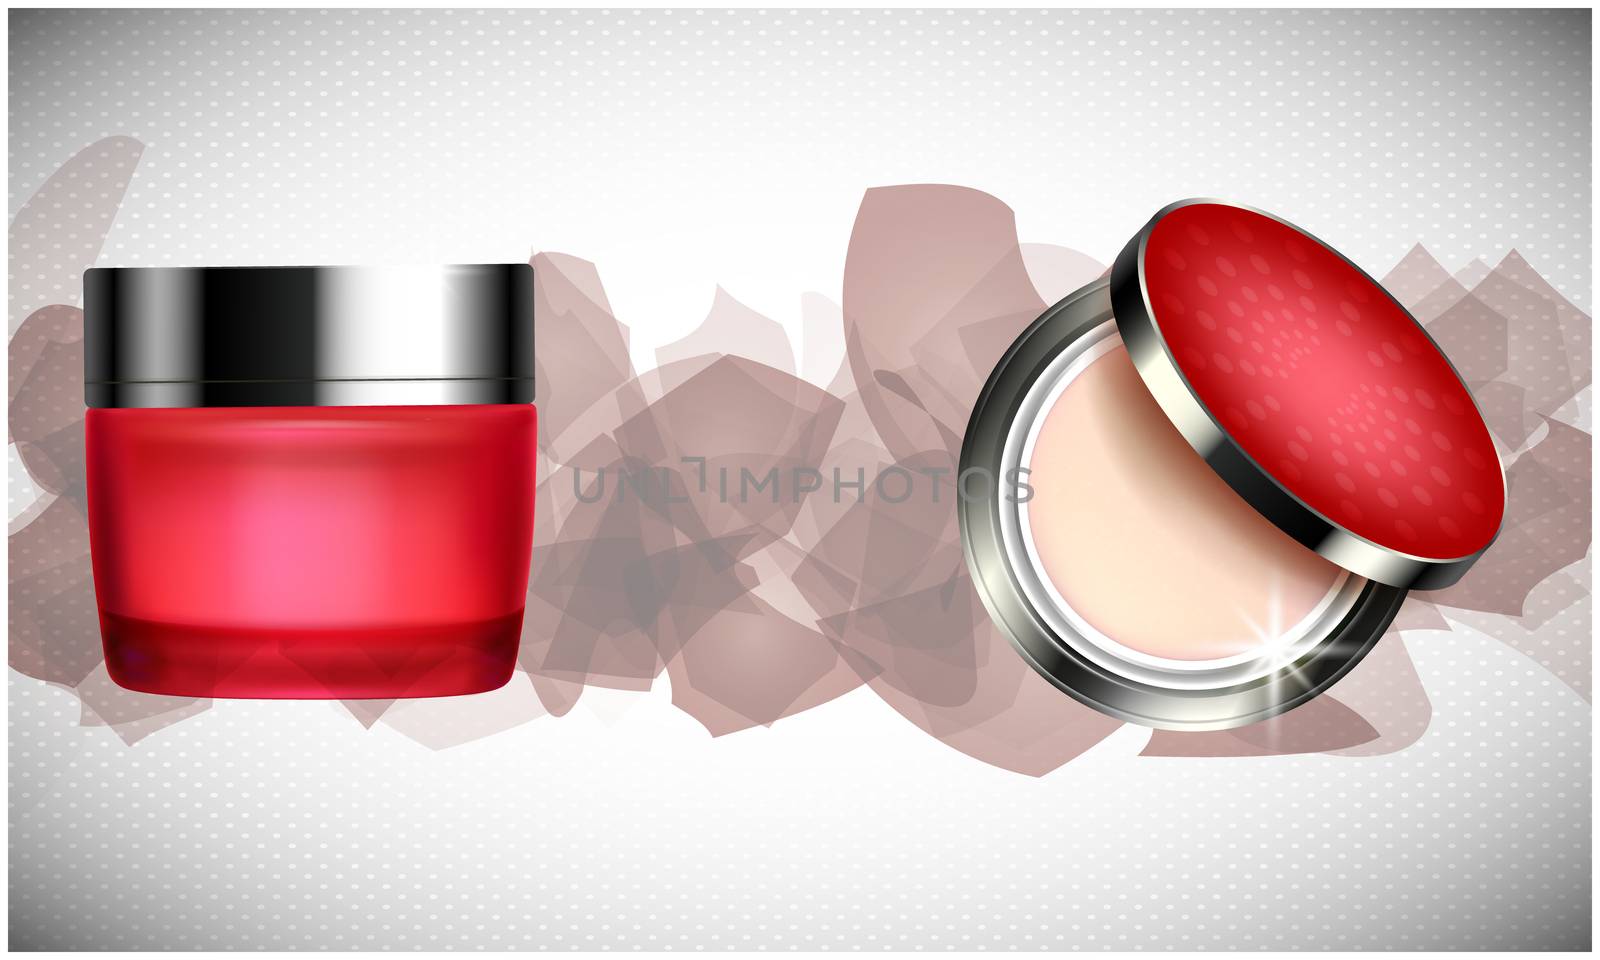 mock up illustration of beauty product on abstract background by aanavcreationsplus